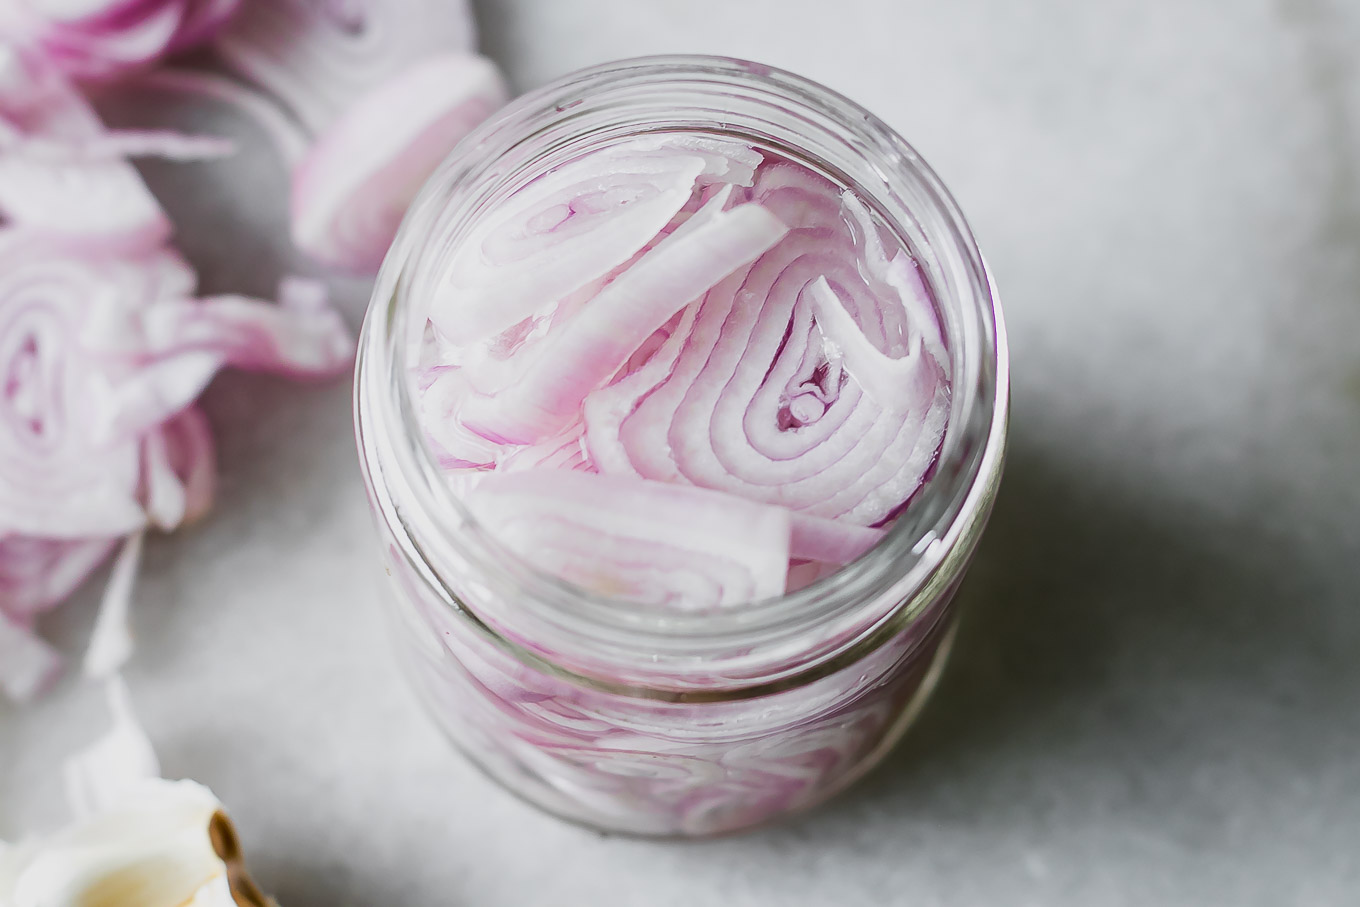 sliced shallots in a pickling jar on a white table